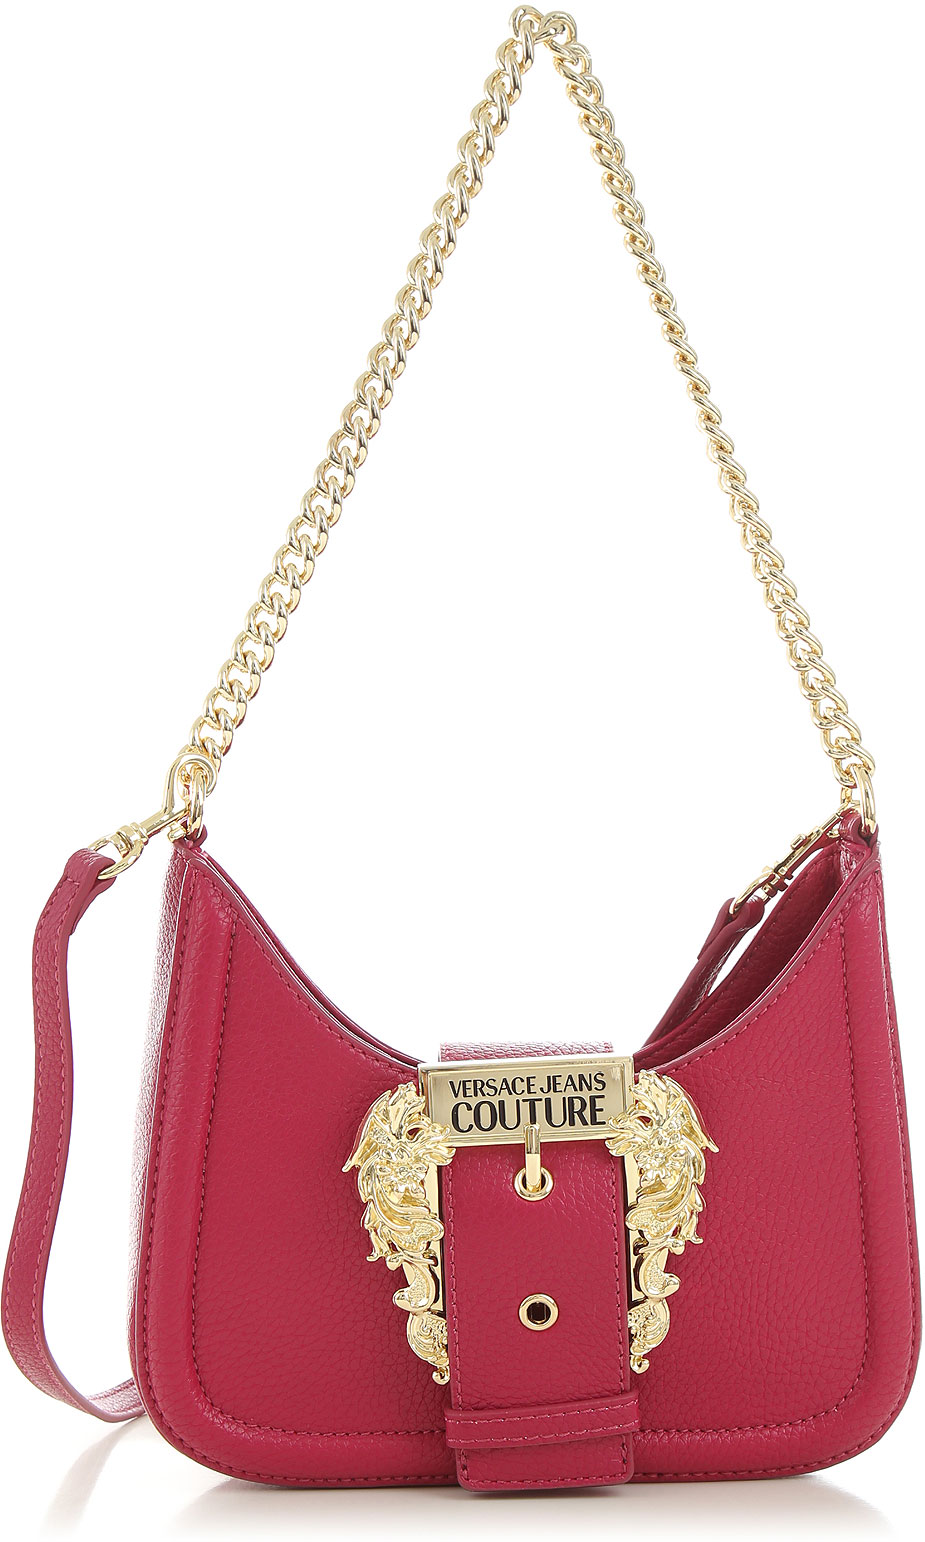 Handbags Versace Jeans Couture , Style code: 73va4bf5-zs413-538